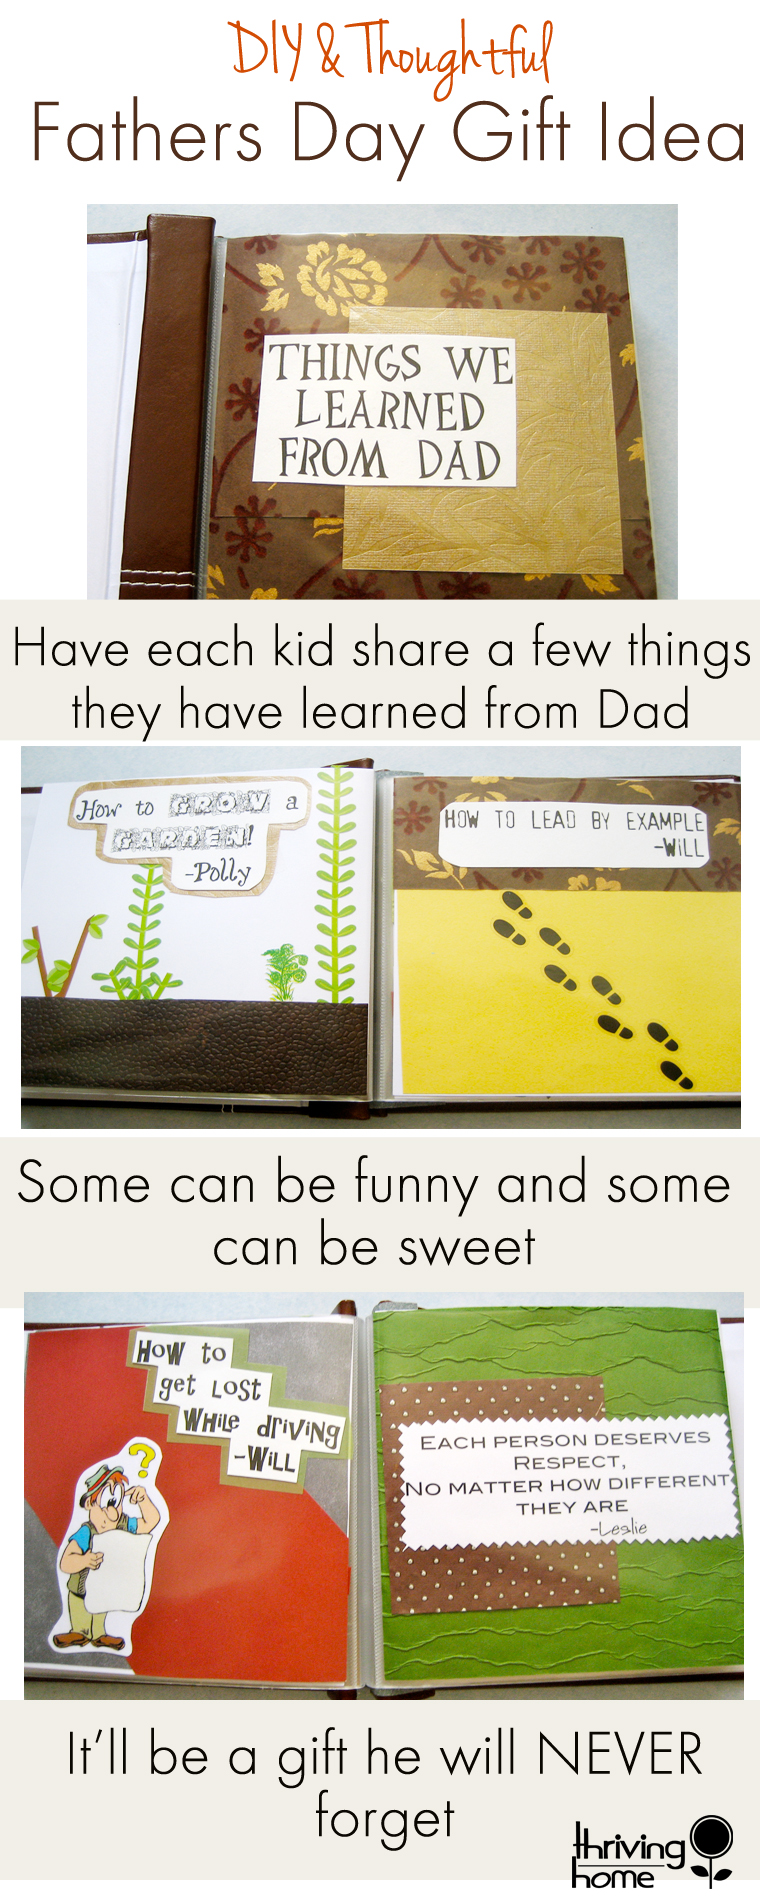 a diy thoughtful gift idea for dad